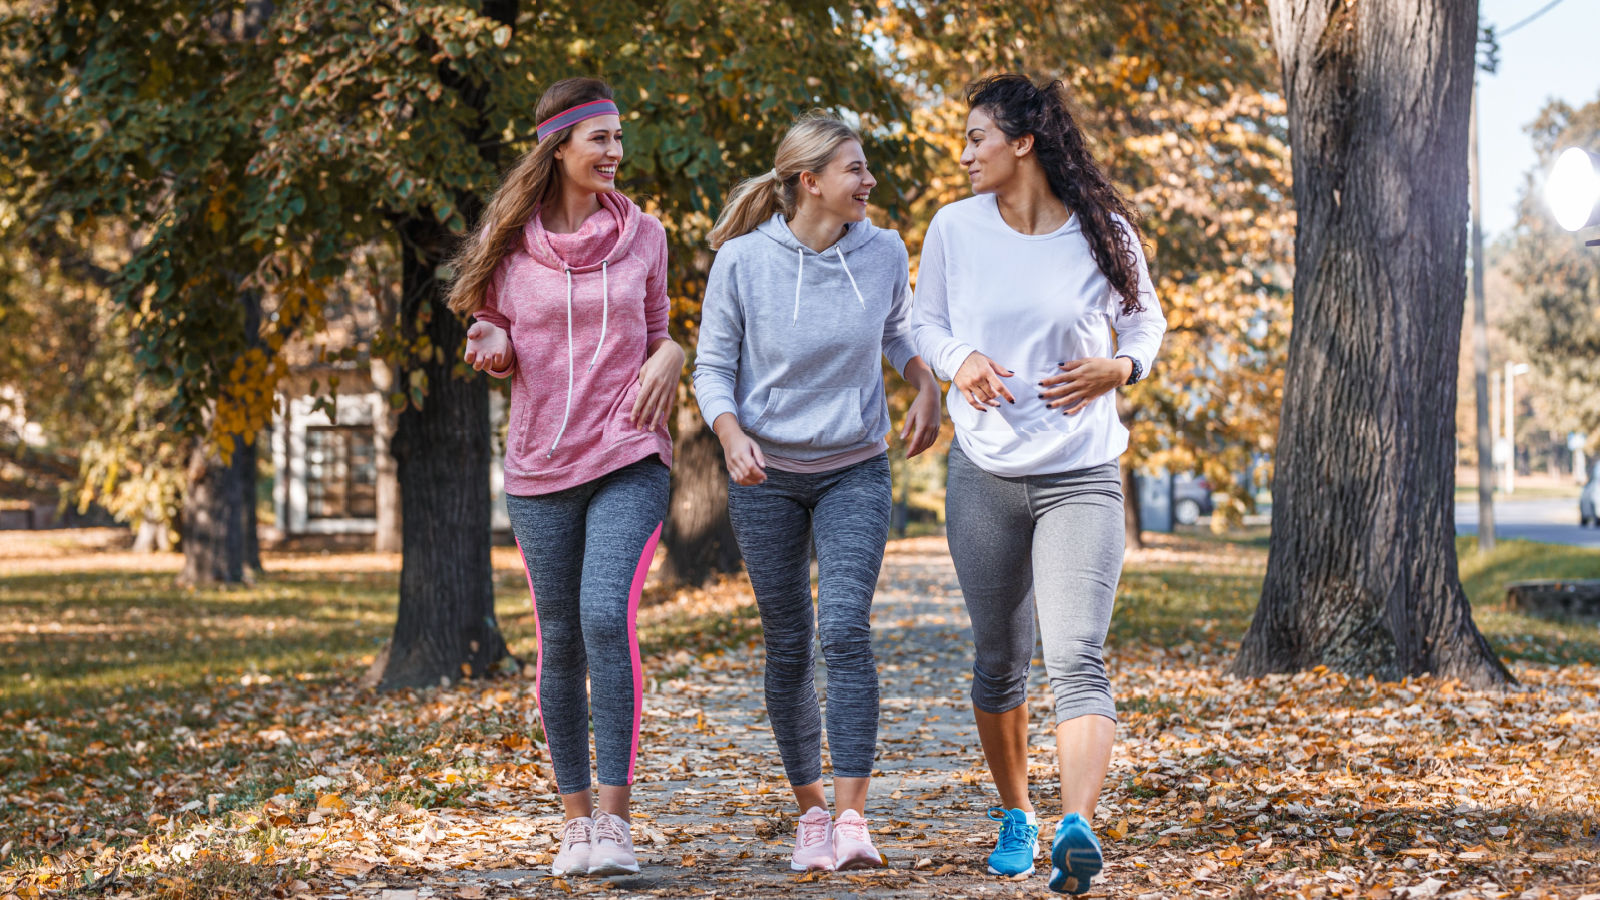 image credit: Balance-Form-Creative/shutterstock <p>Suggest a walk instead of sitting in a café when catching up with friends. Moving conversations are not just good for your body; they’re good for the soul. You’ll find the dynamic environment makes for a refreshing change. And who knows, you might just discover your new favorite spot.</p>